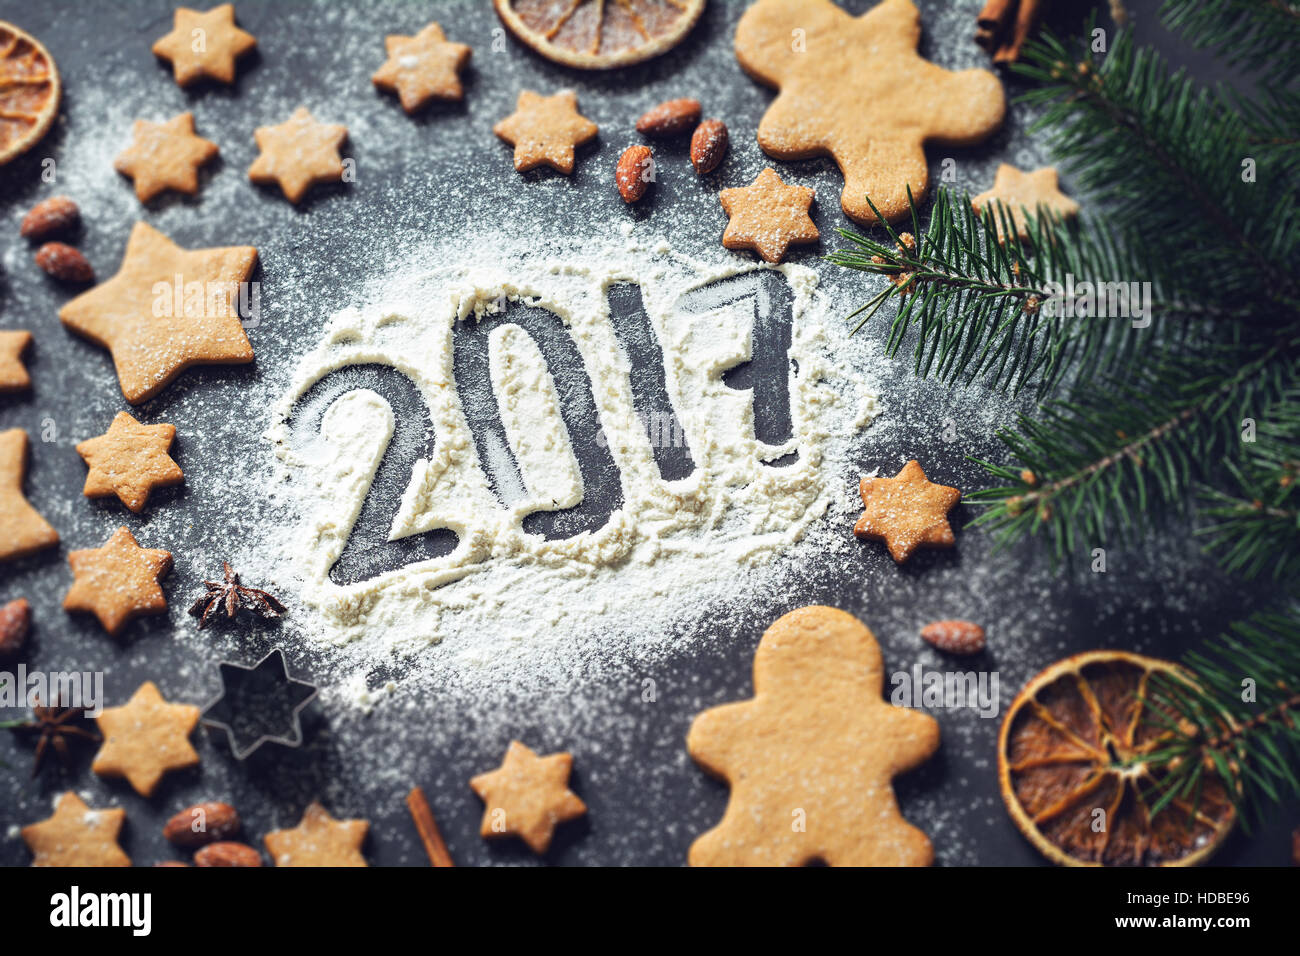 Happy New Year 2017 card: frame of gingerbread cookies, stars, fir tree, spices and Christmas decorations with number 2017 Stock Photo